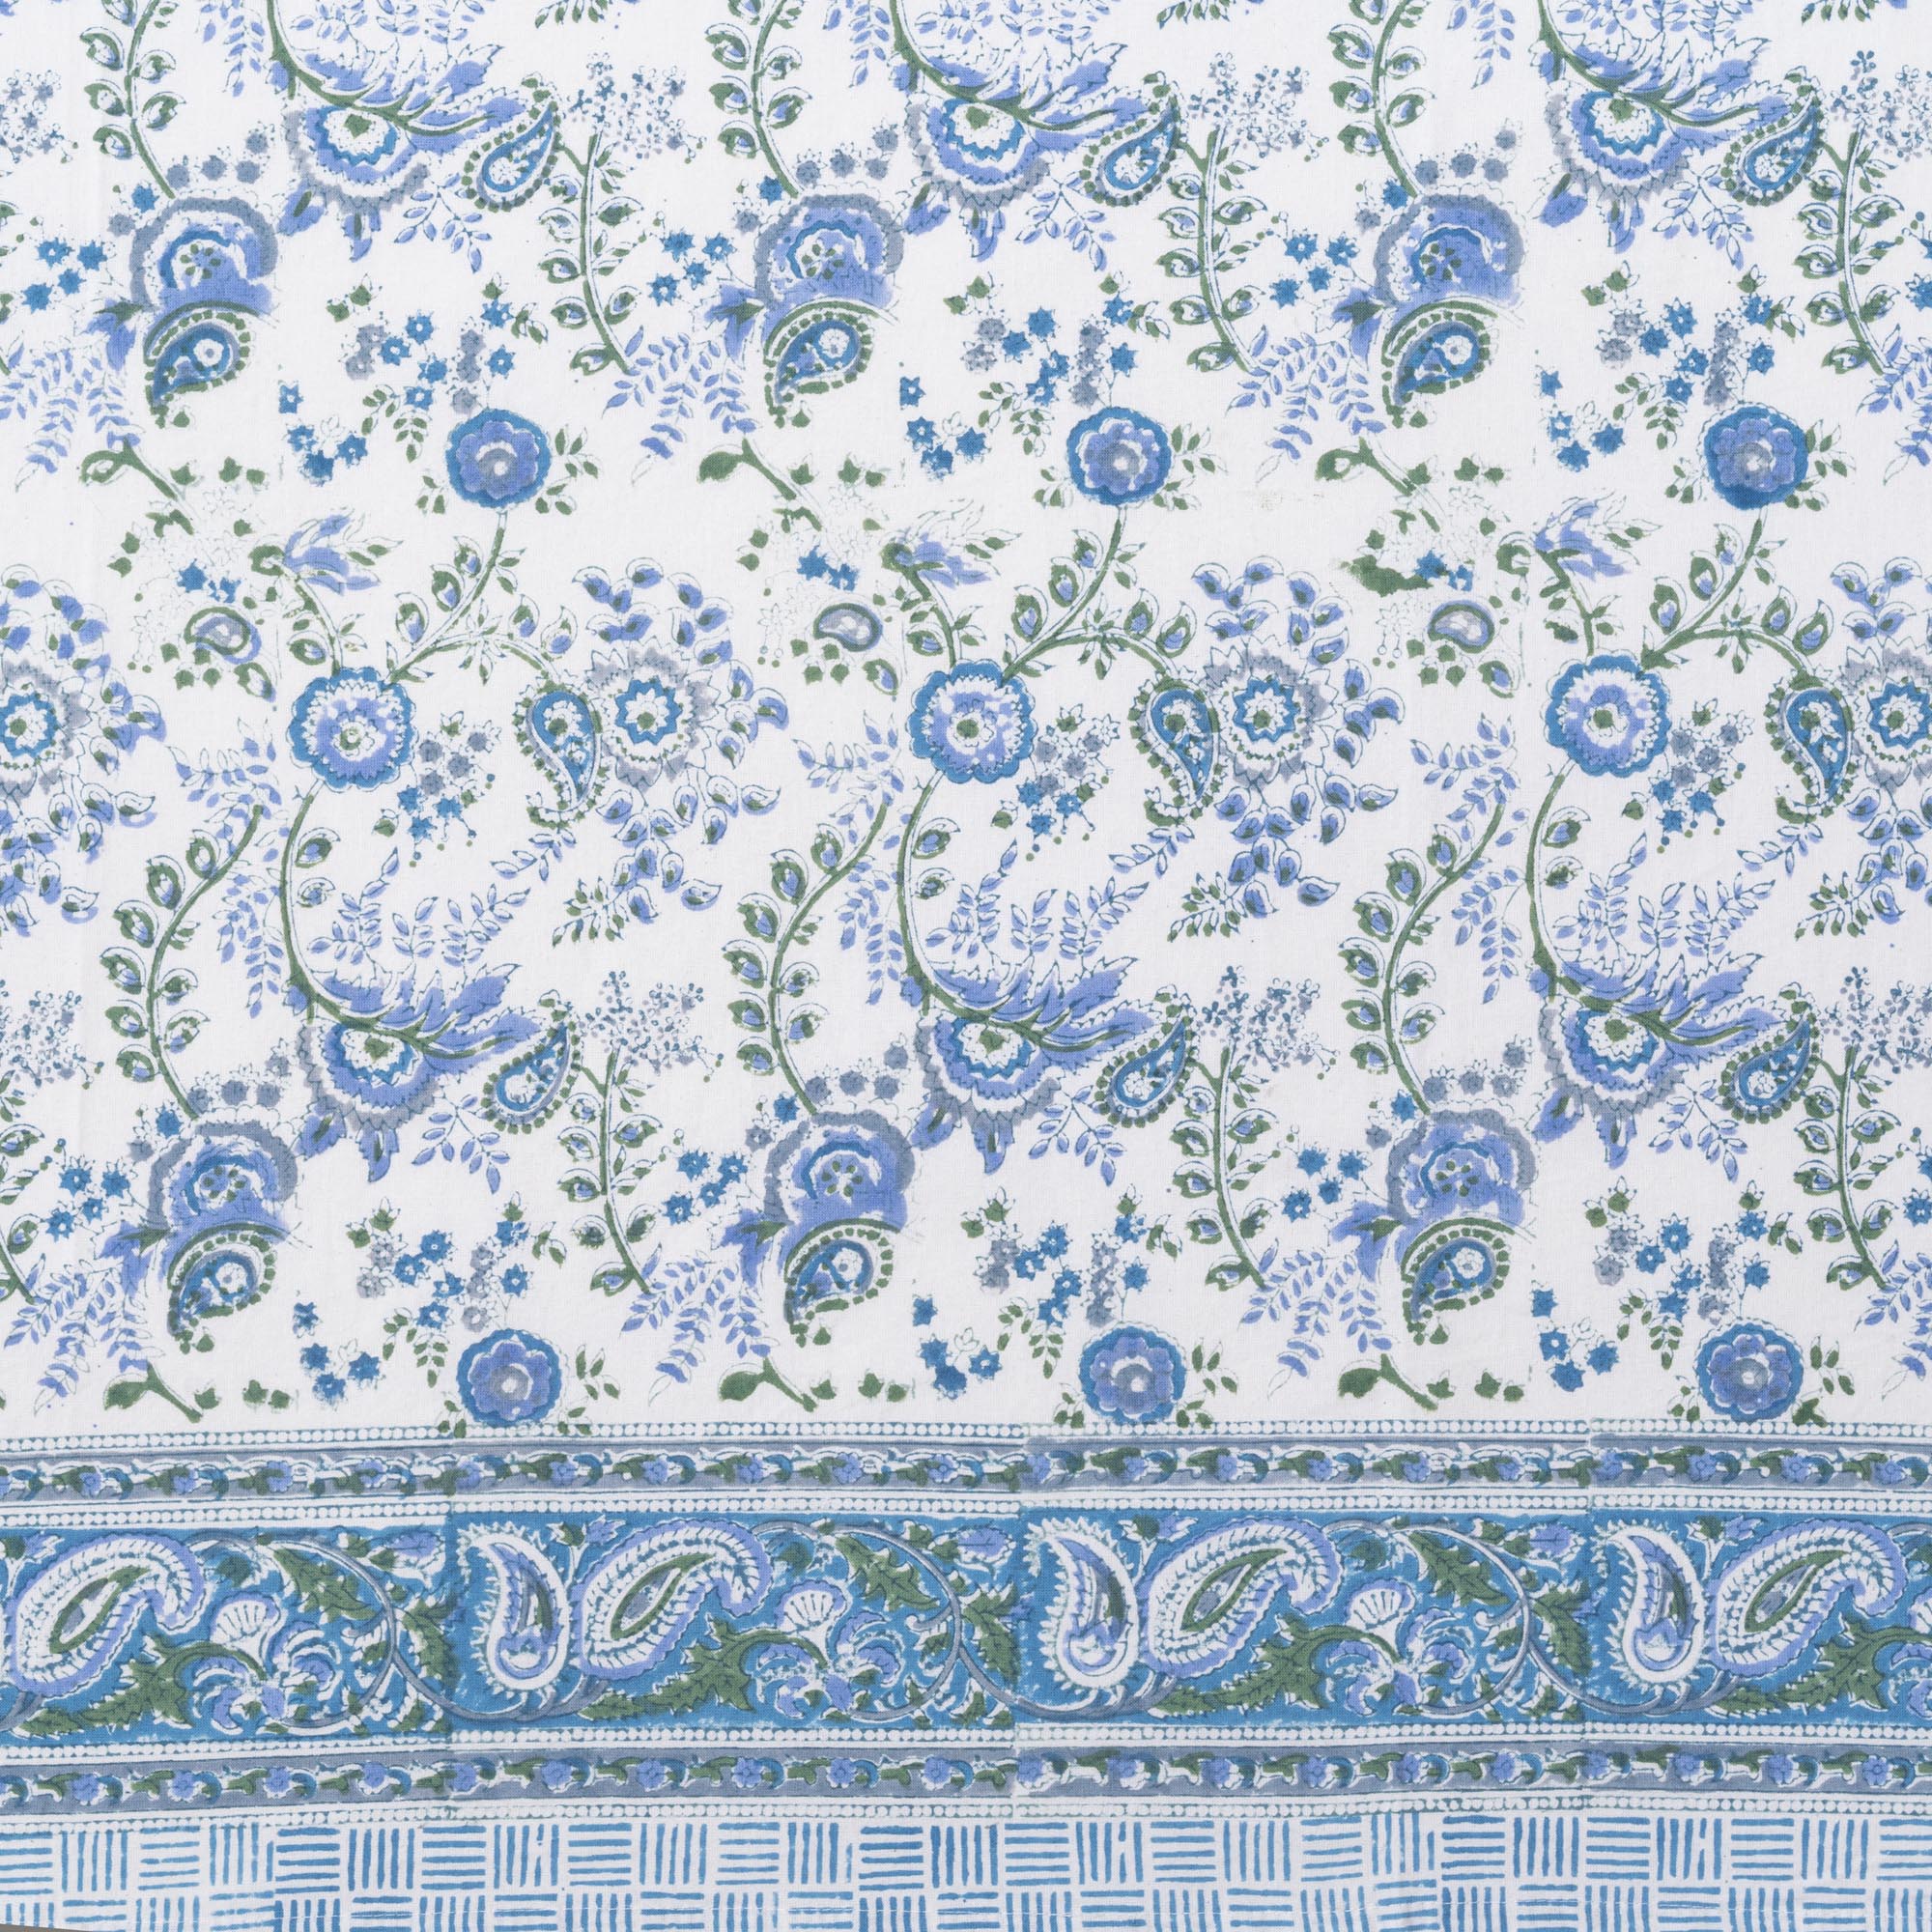 MEADOW TABLECLOTH IN BLUE